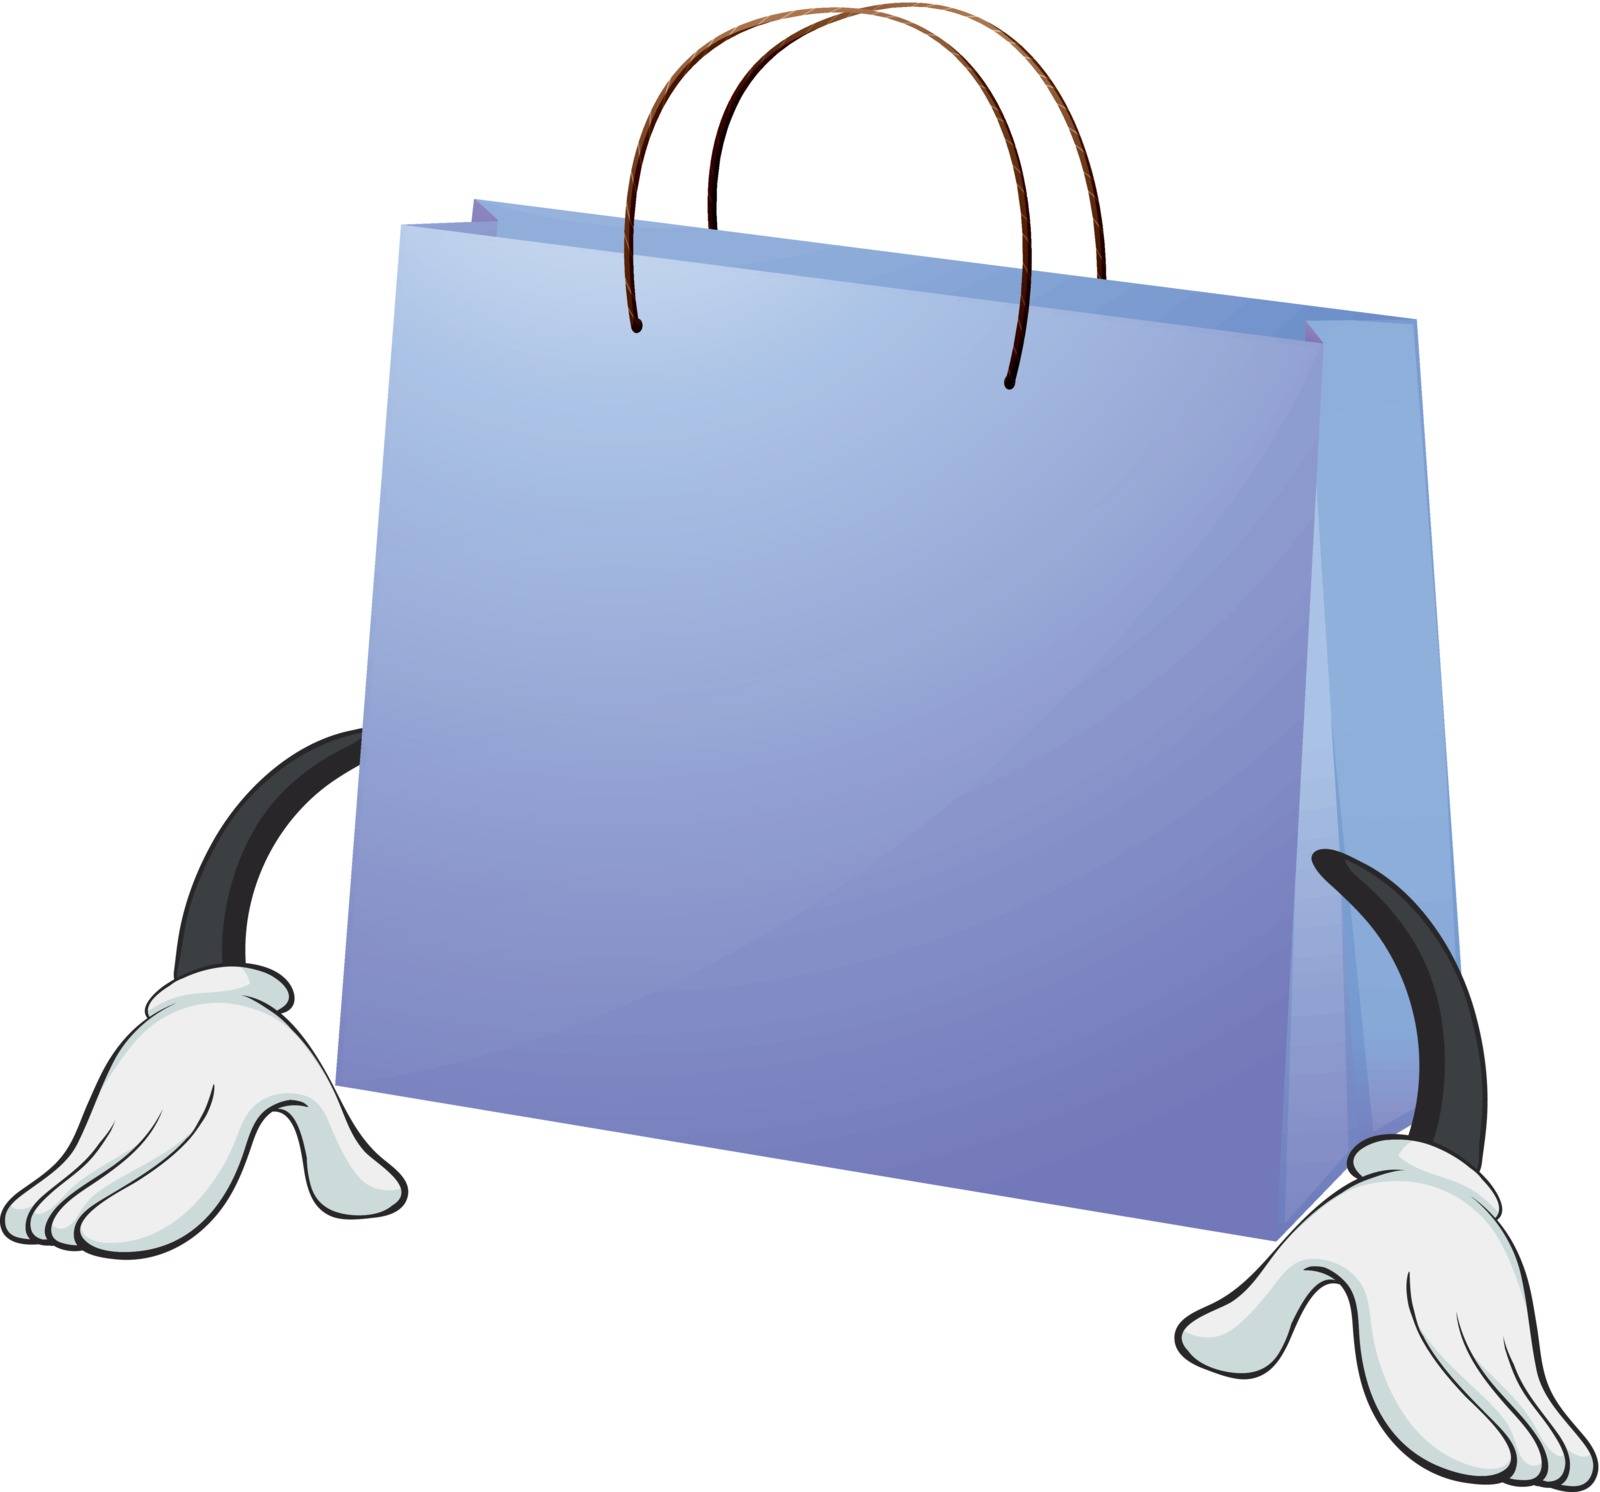 An illustration of a blue bag on white background